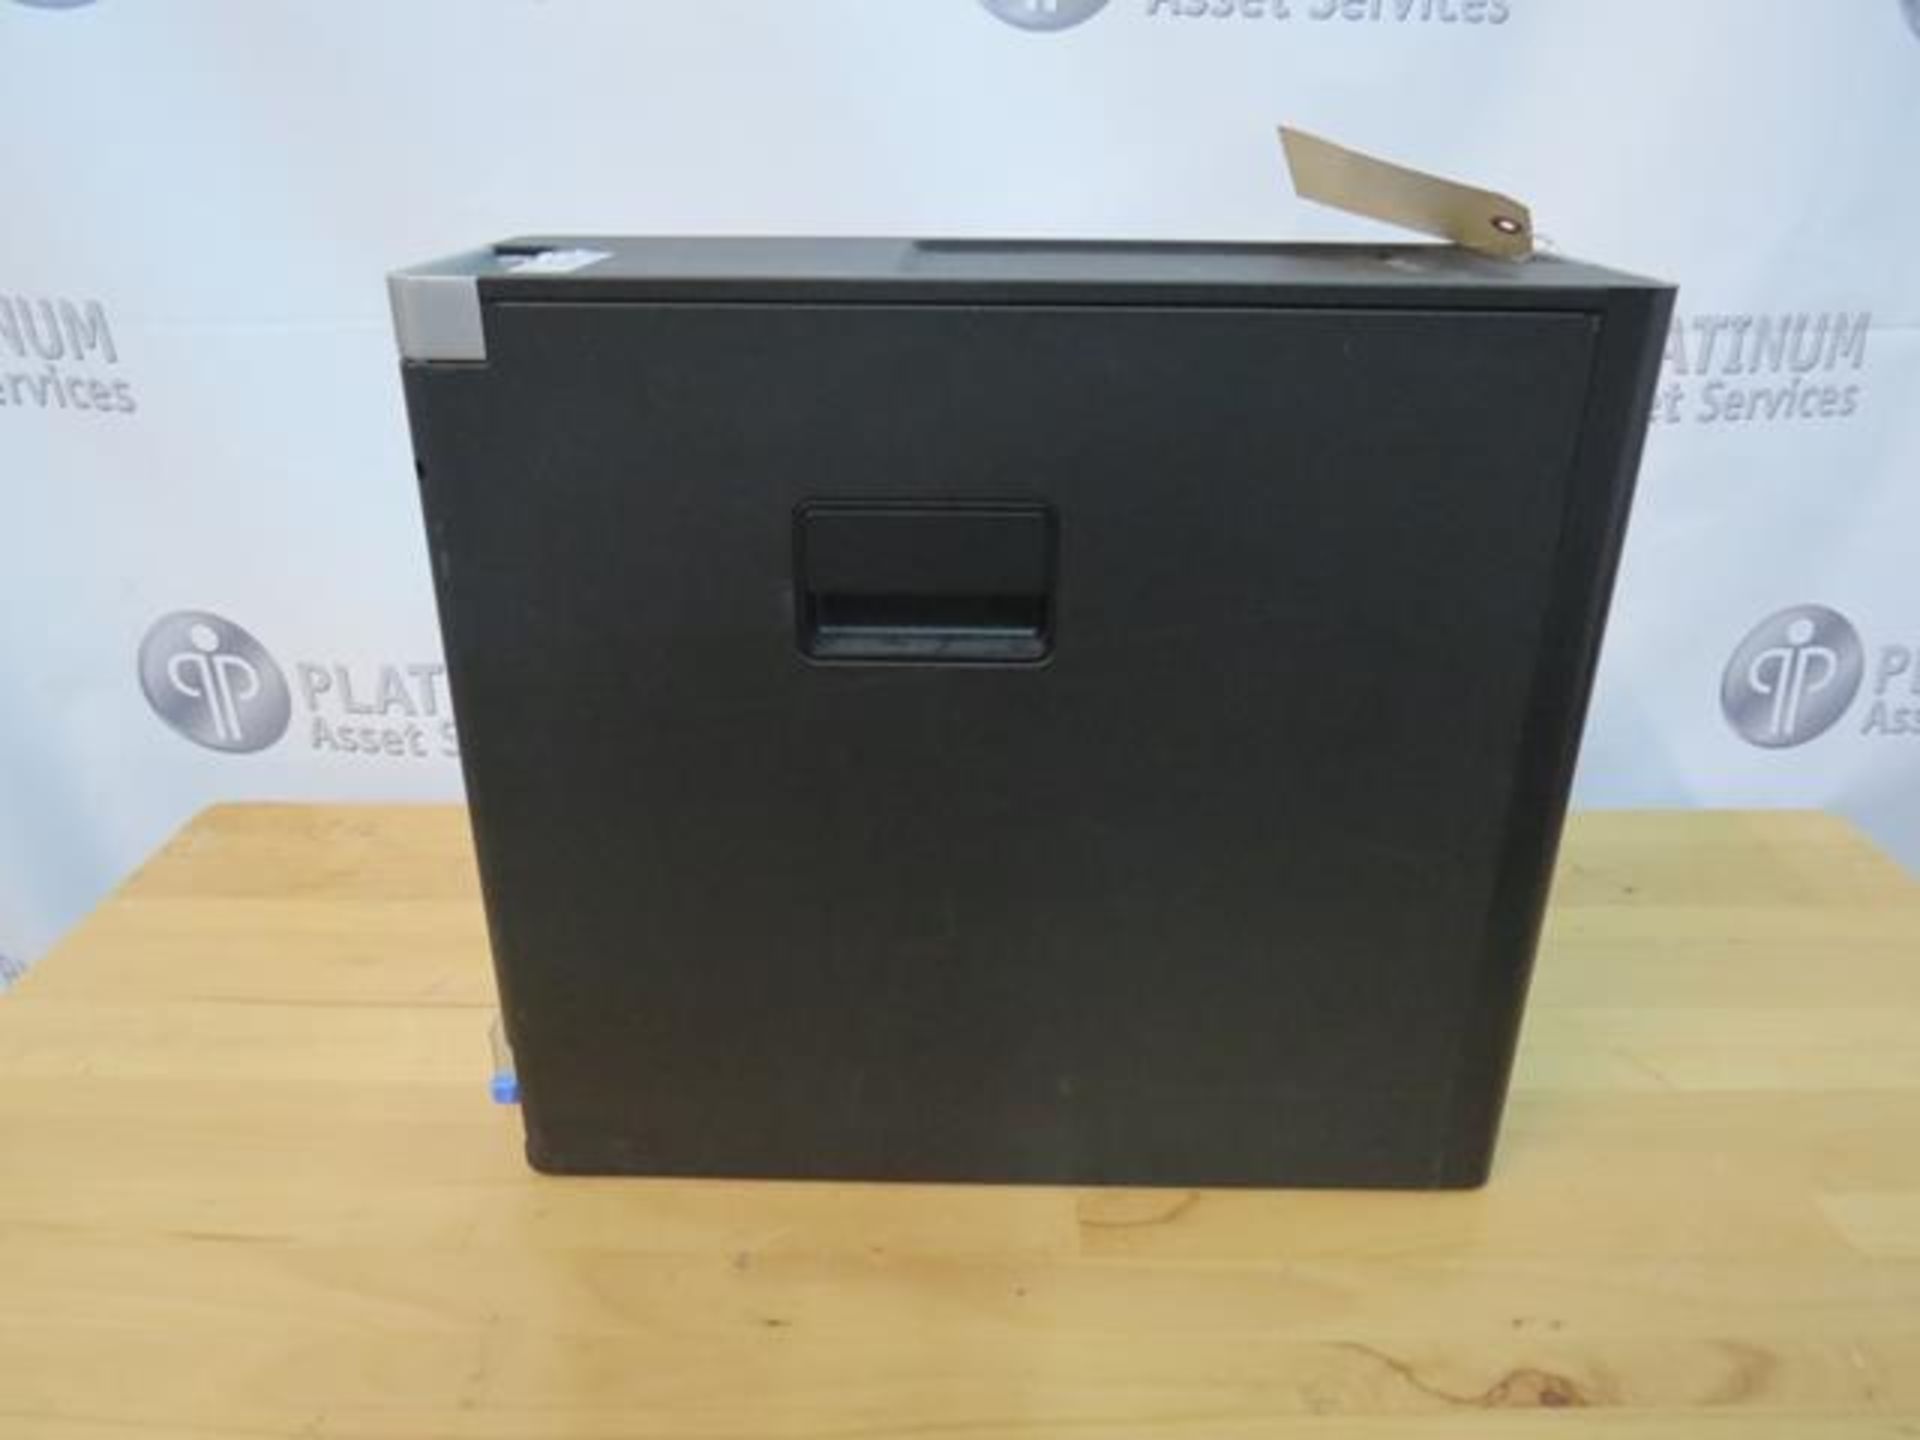 DELL, PRECISION T5600, DESKTOP WORKSTATION (UNIT DOES NOT BOOT UP) (TAG#120) - Image 3 of 6